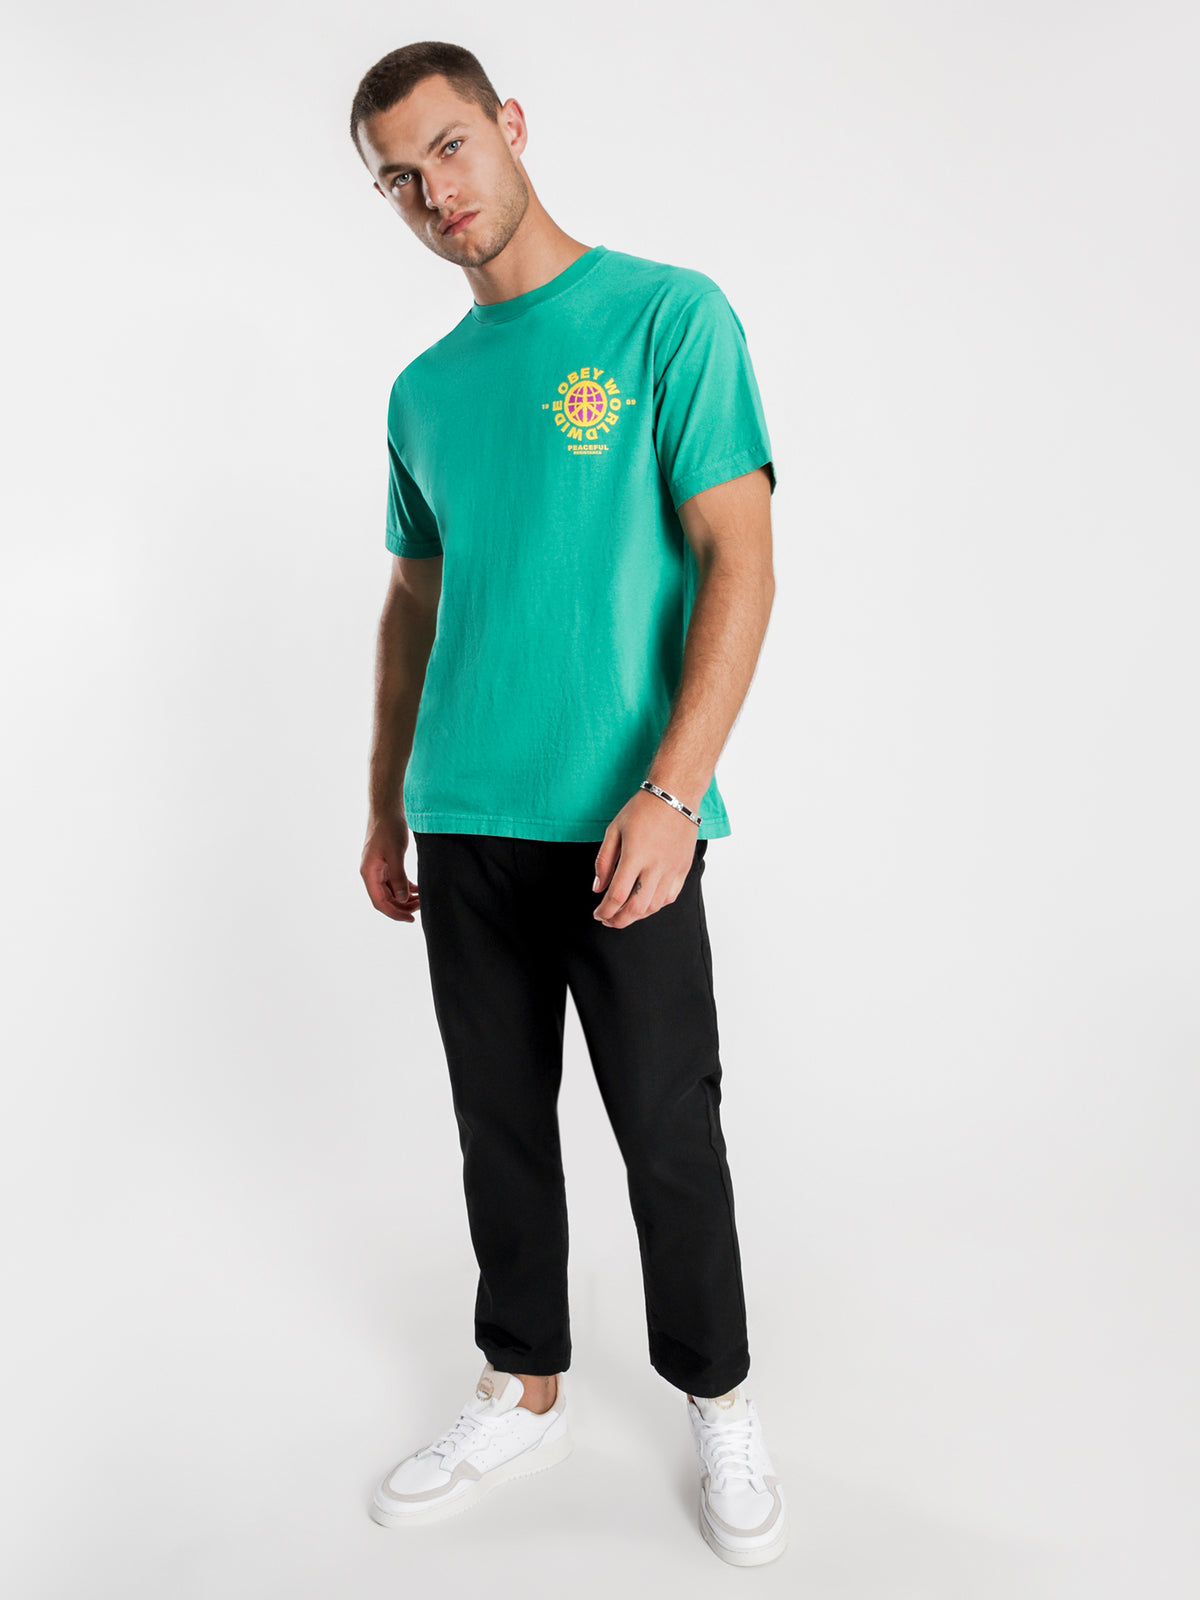 Obey Peaceful Resistance T-Shirt in Emerald